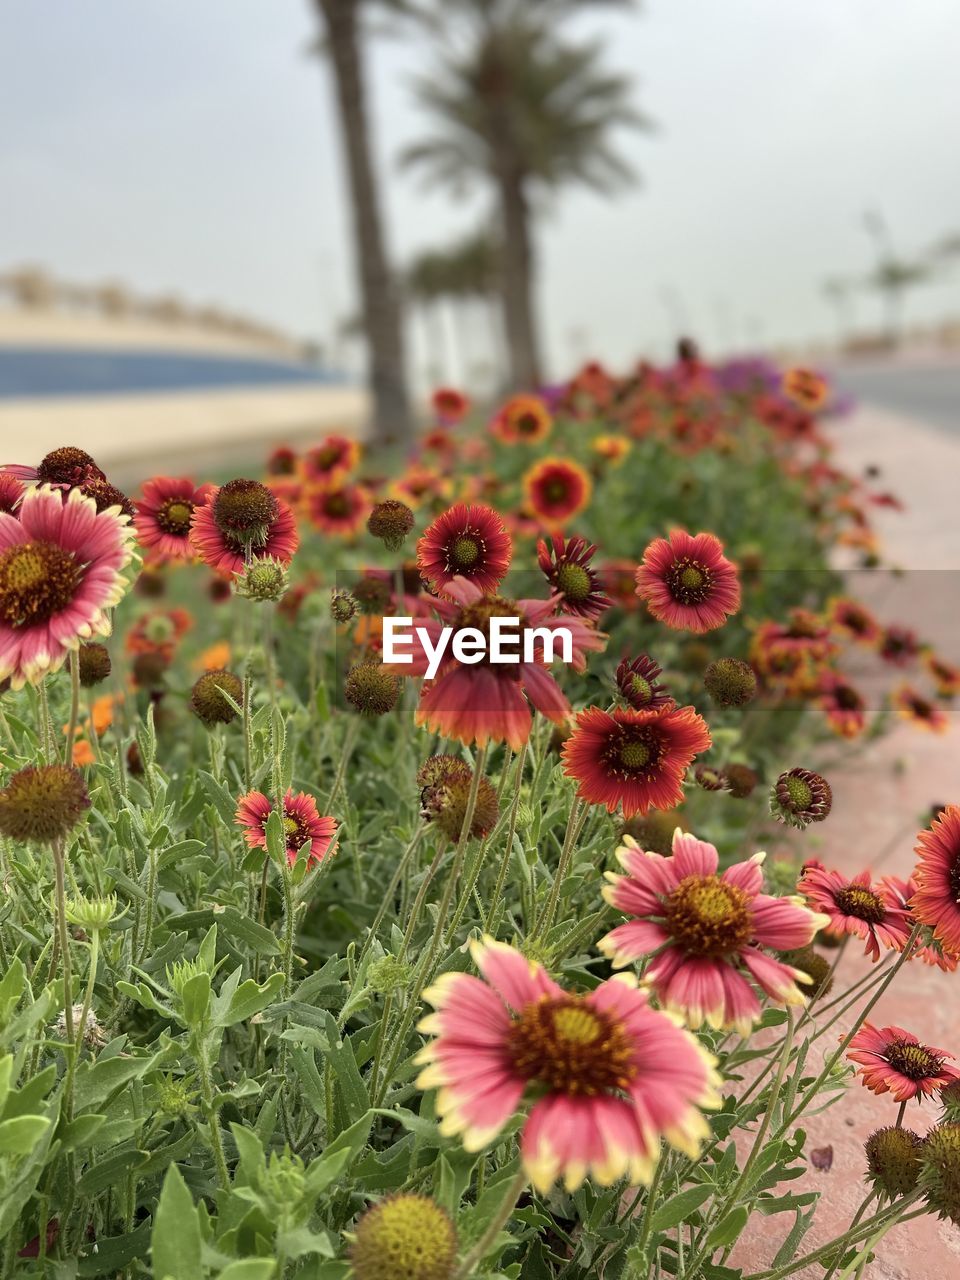 plant, flower, flowering plant, beauty in nature, freshness, nature, growth, sky, focus on foreground, no people, land, fragility, flower head, close-up, pink, inflorescence, petal, field, day, outdoors, water, environment, tranquility, landscape, scenics - nature, botany, travel destinations, tree